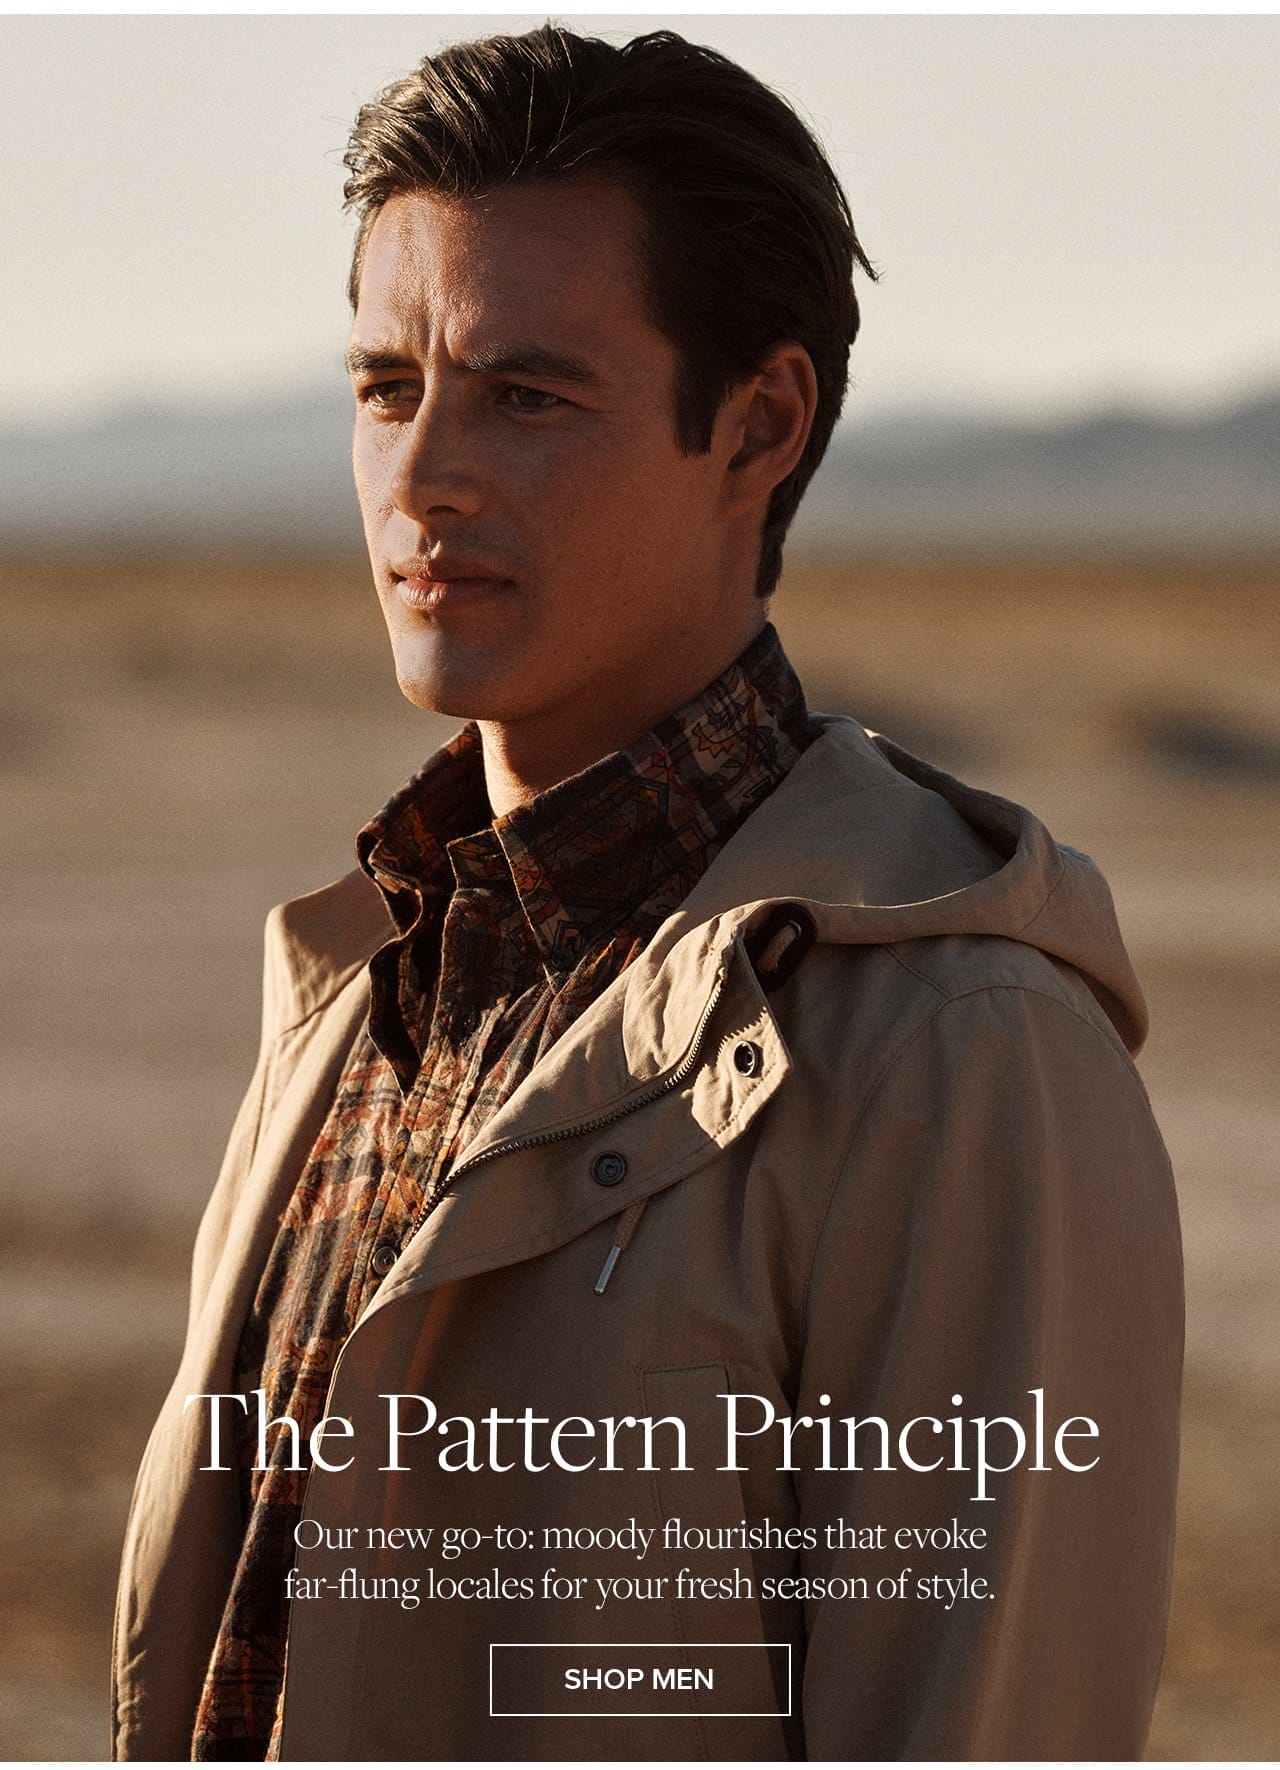 The Pattern Principle Our new go-to moody flourishes that evoke far-flung locales for your fresh season of style. Shop Men